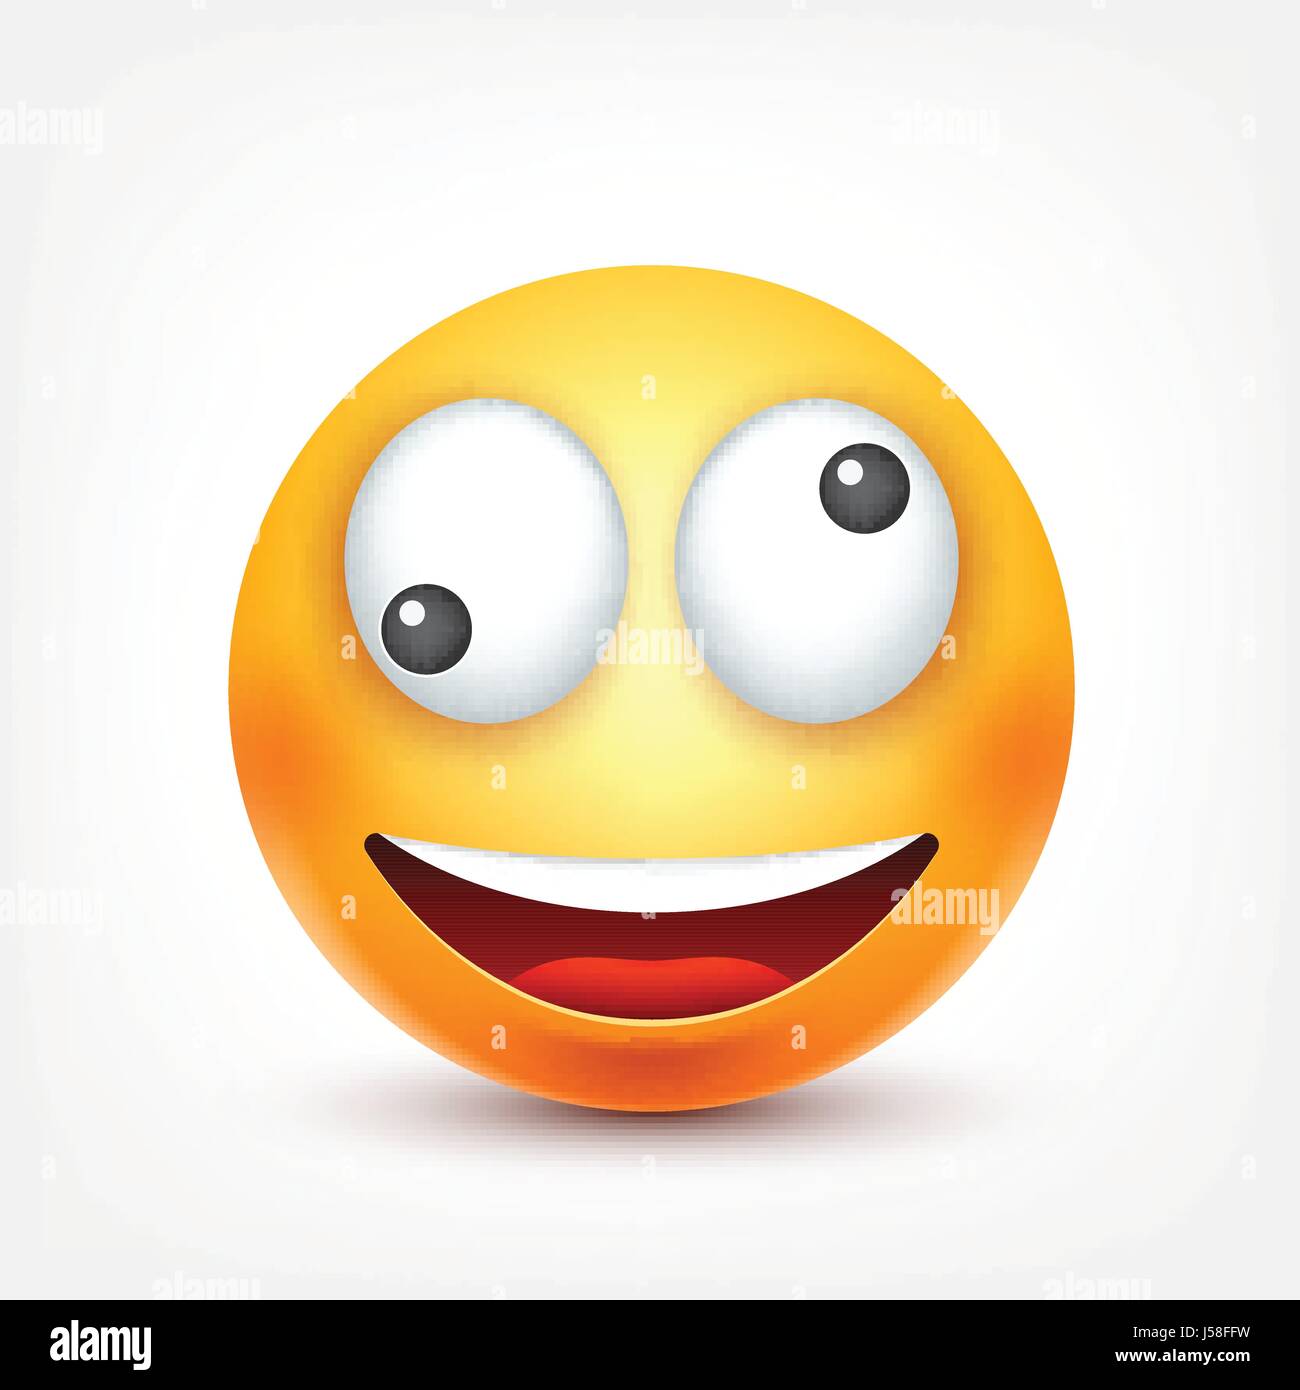 smileyemoticon-yellow-face-with-emotions-facial-expression-3d-realistic-J58FFW.jpg